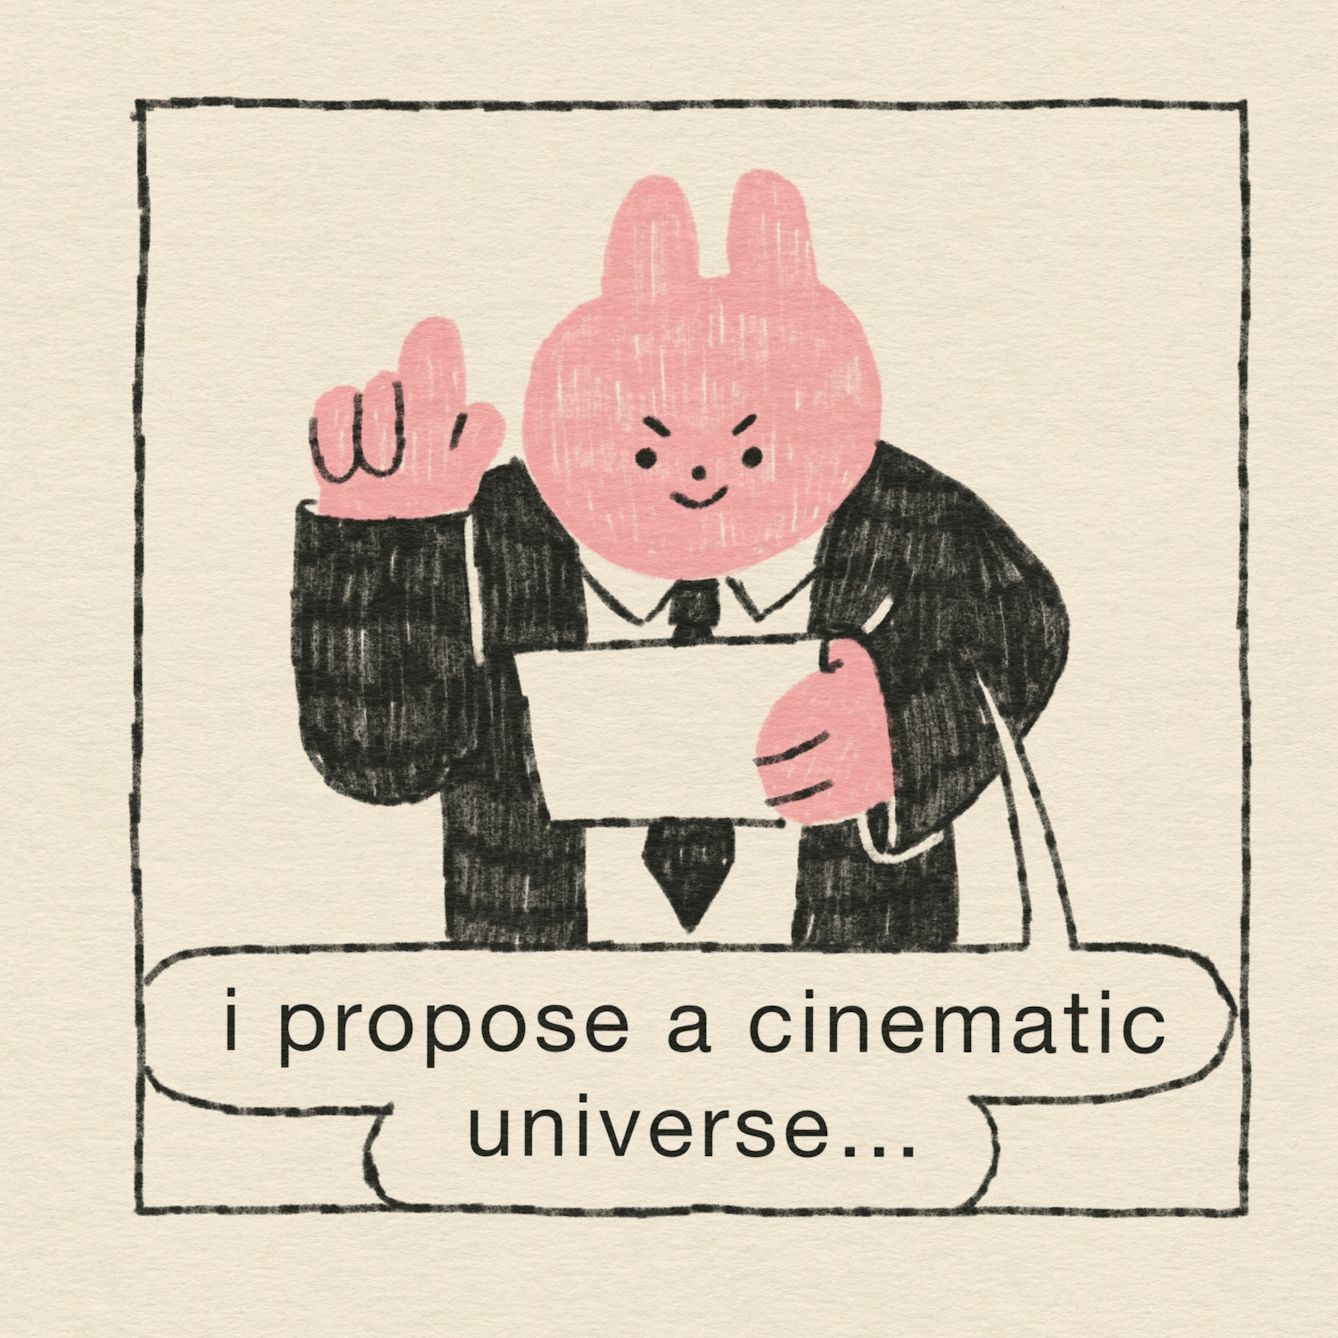 In the second panel, a pink rabbit stands up to pitch his idea. He's wearing a black suit and tie with a sinister smile. “I propose a cinematic universe…”, he says.